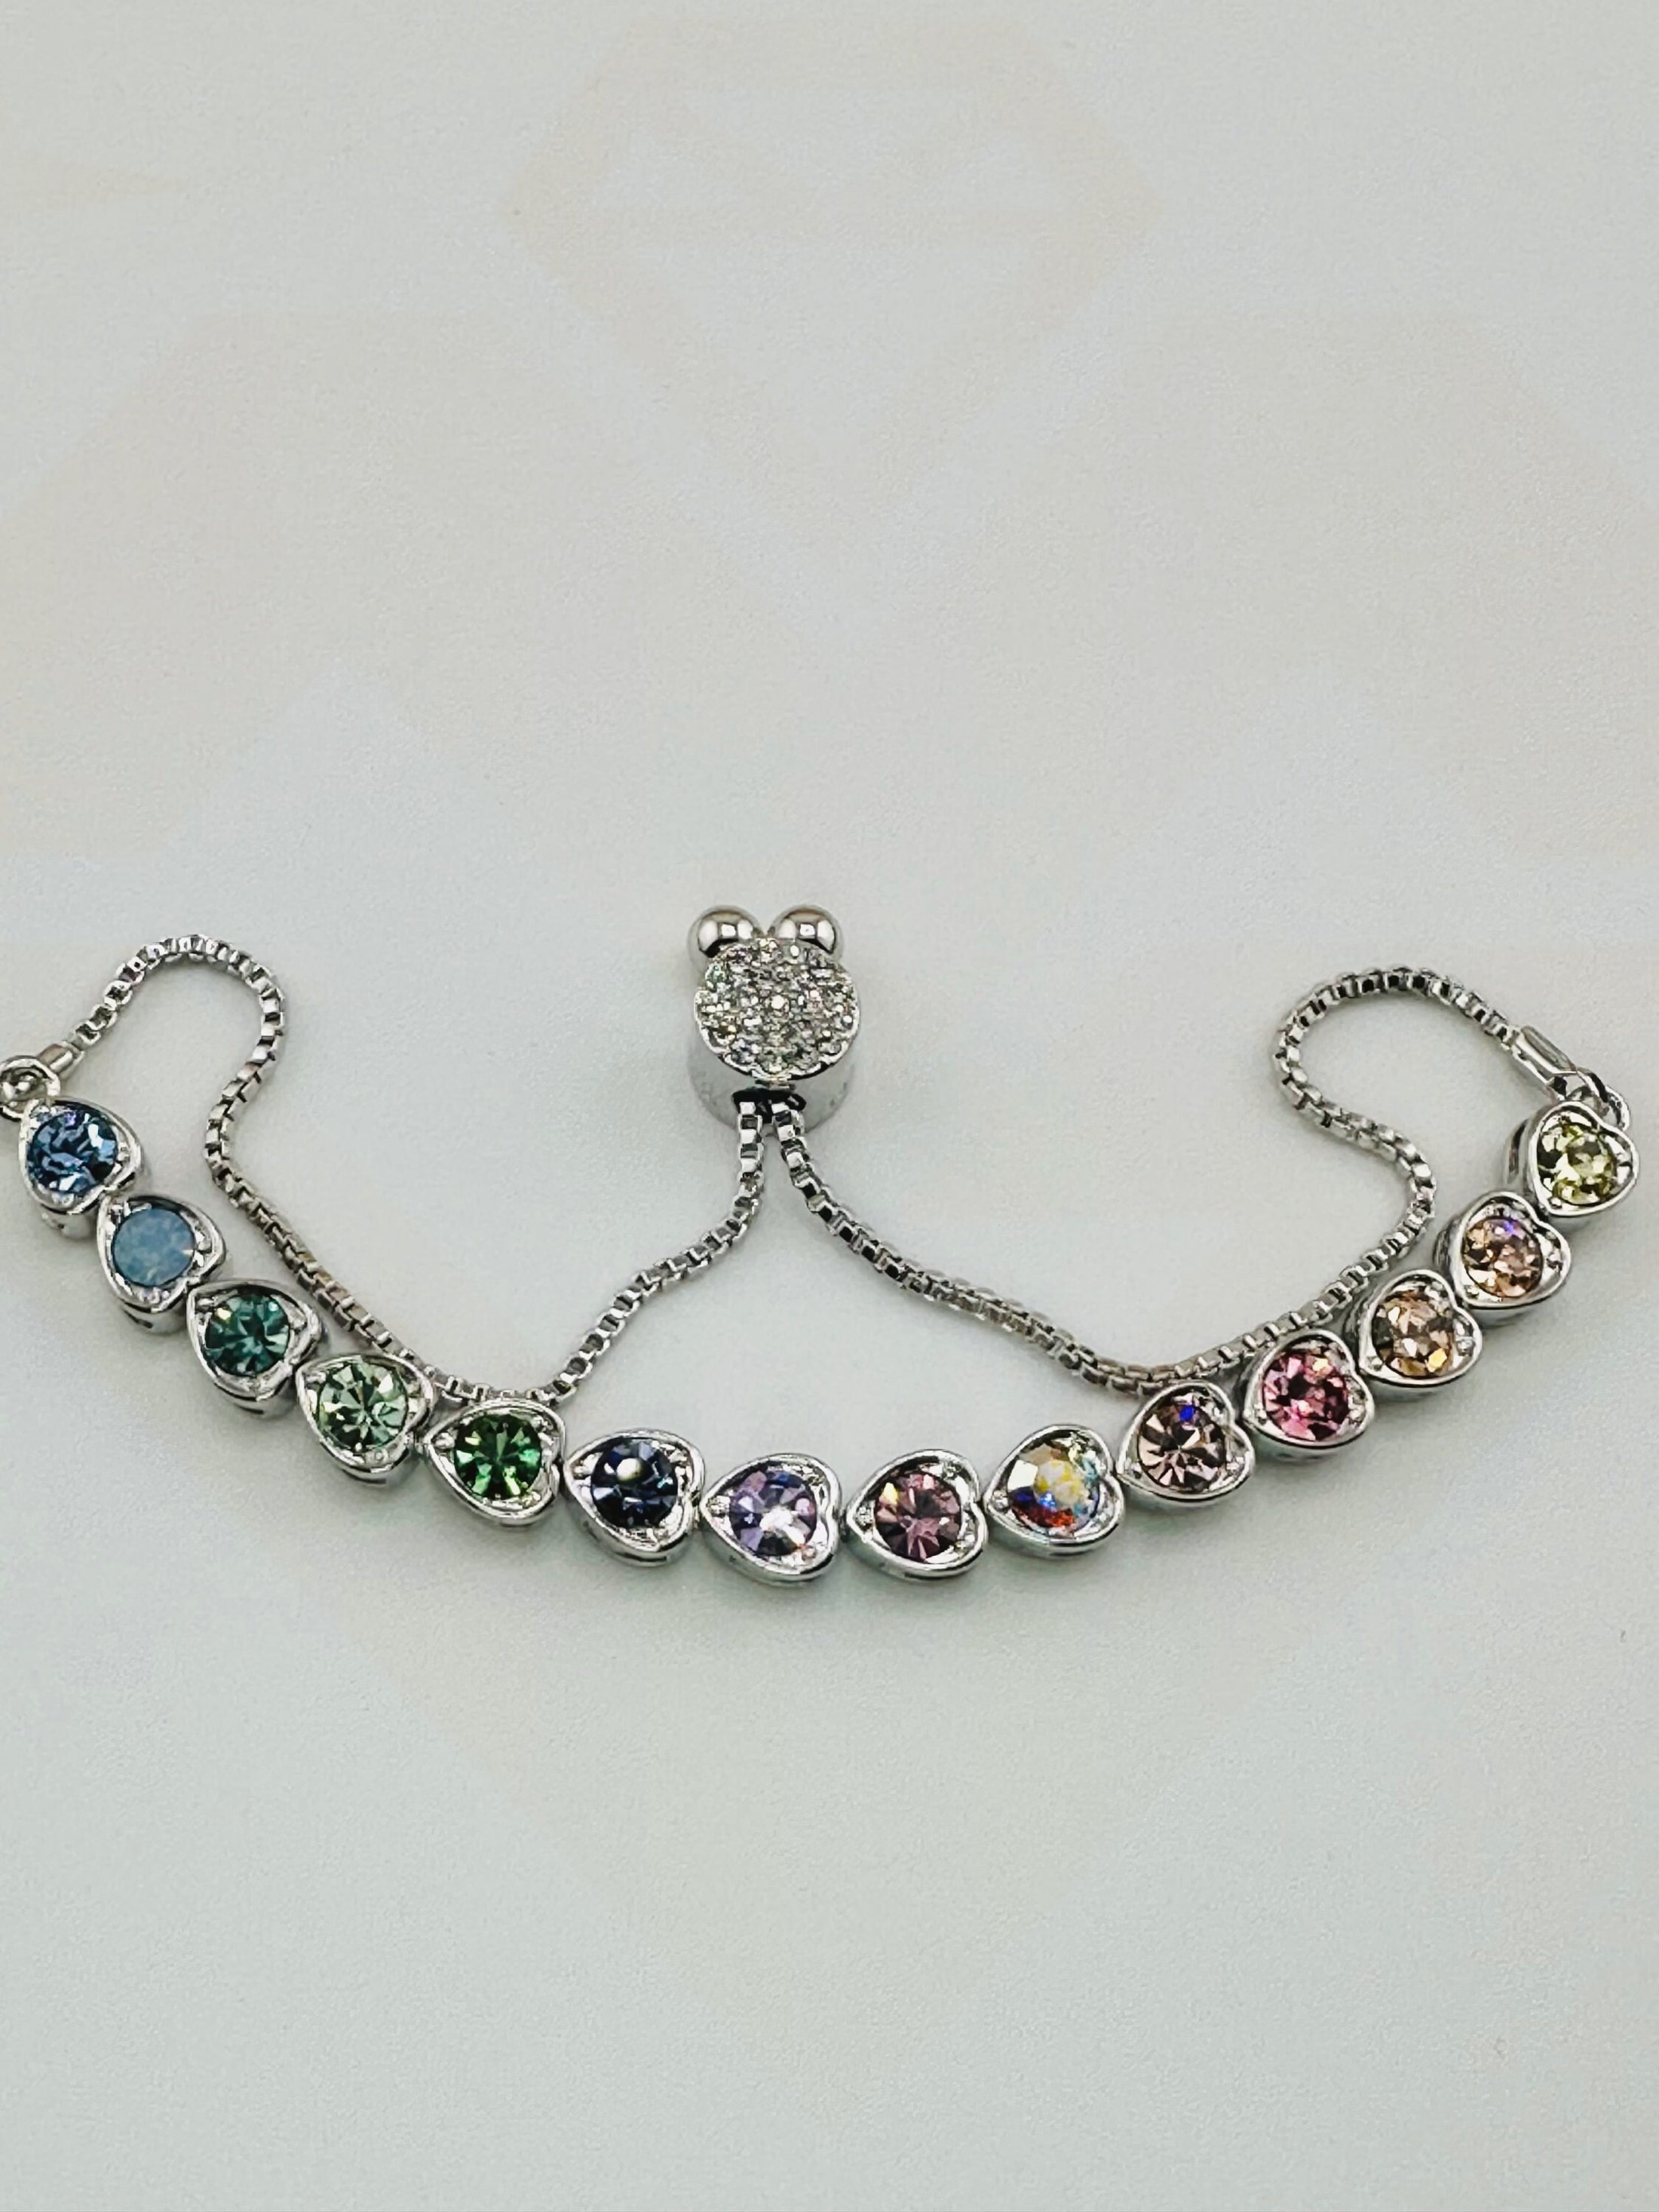 White Gold Vermeil Stunning Multi-Color Bolo Bracelet w/ Swarovski Crystals - A Radiant Gift for Her Anniversary Birthday - Adjustable Bolo